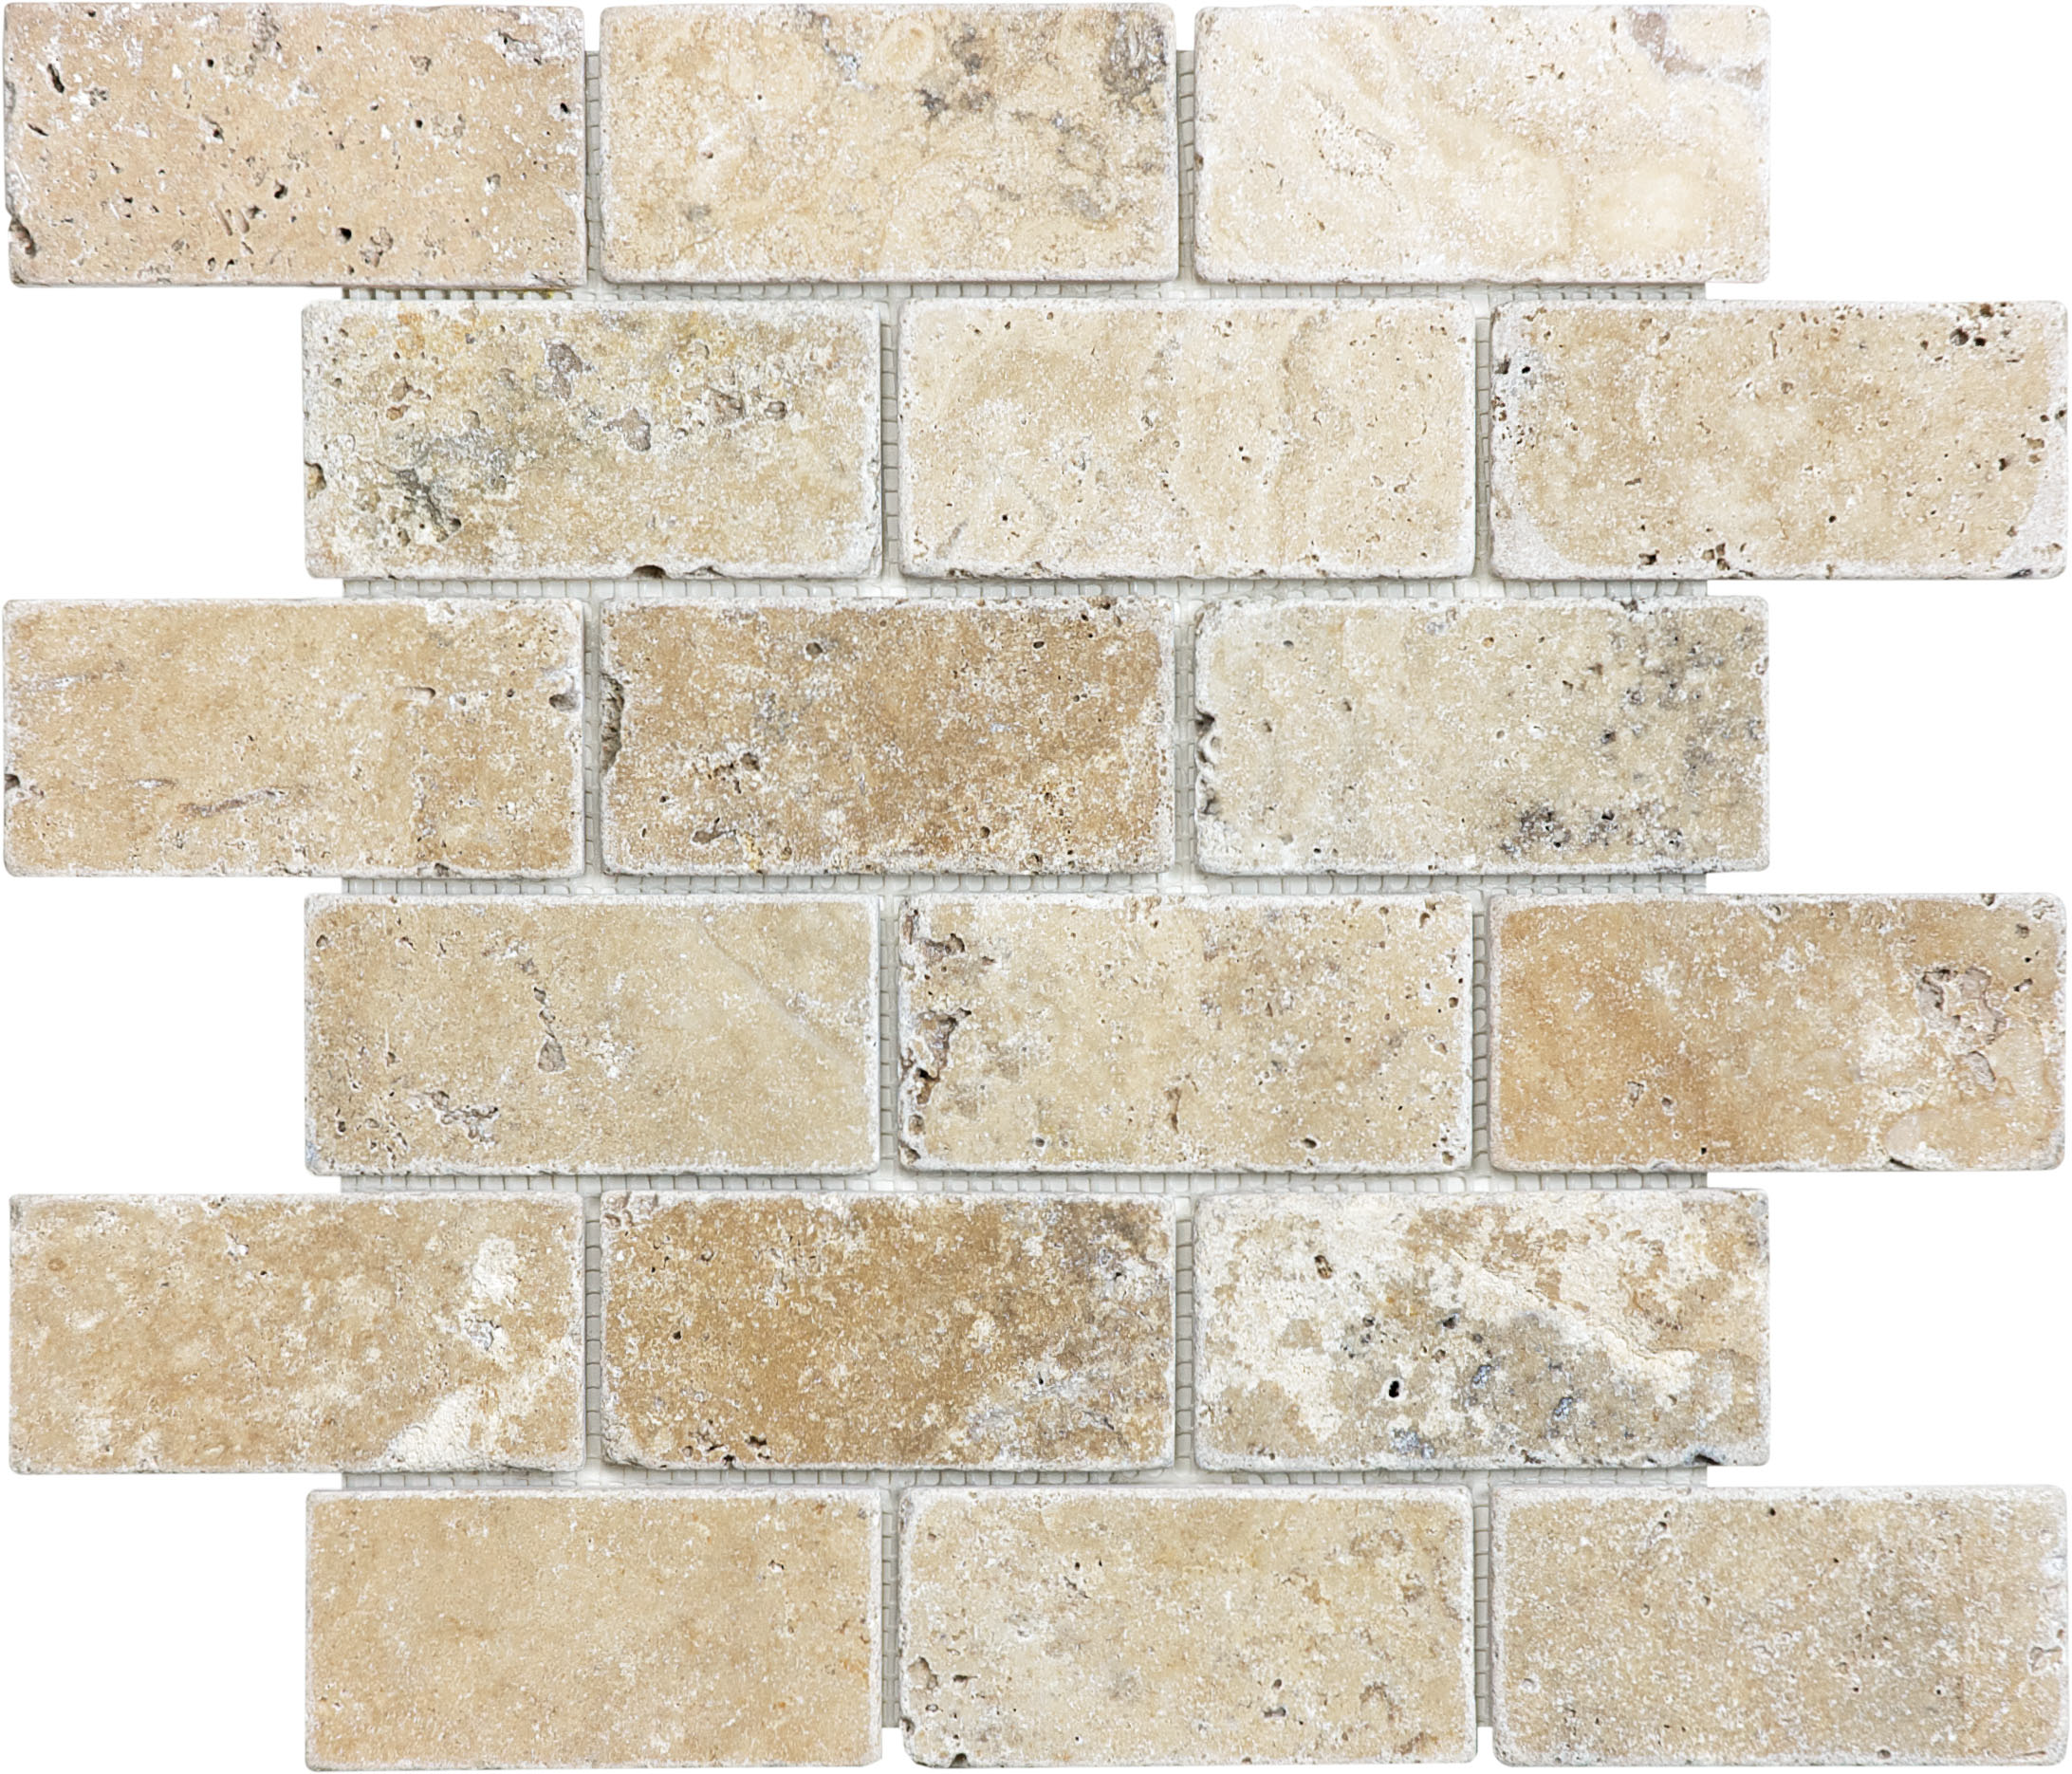 travertine brick offset 2x4-inch pattern natural stone mosaic from picasso anatolia collection distributed by surface group international tumbled finish tumbled edge mesh shape